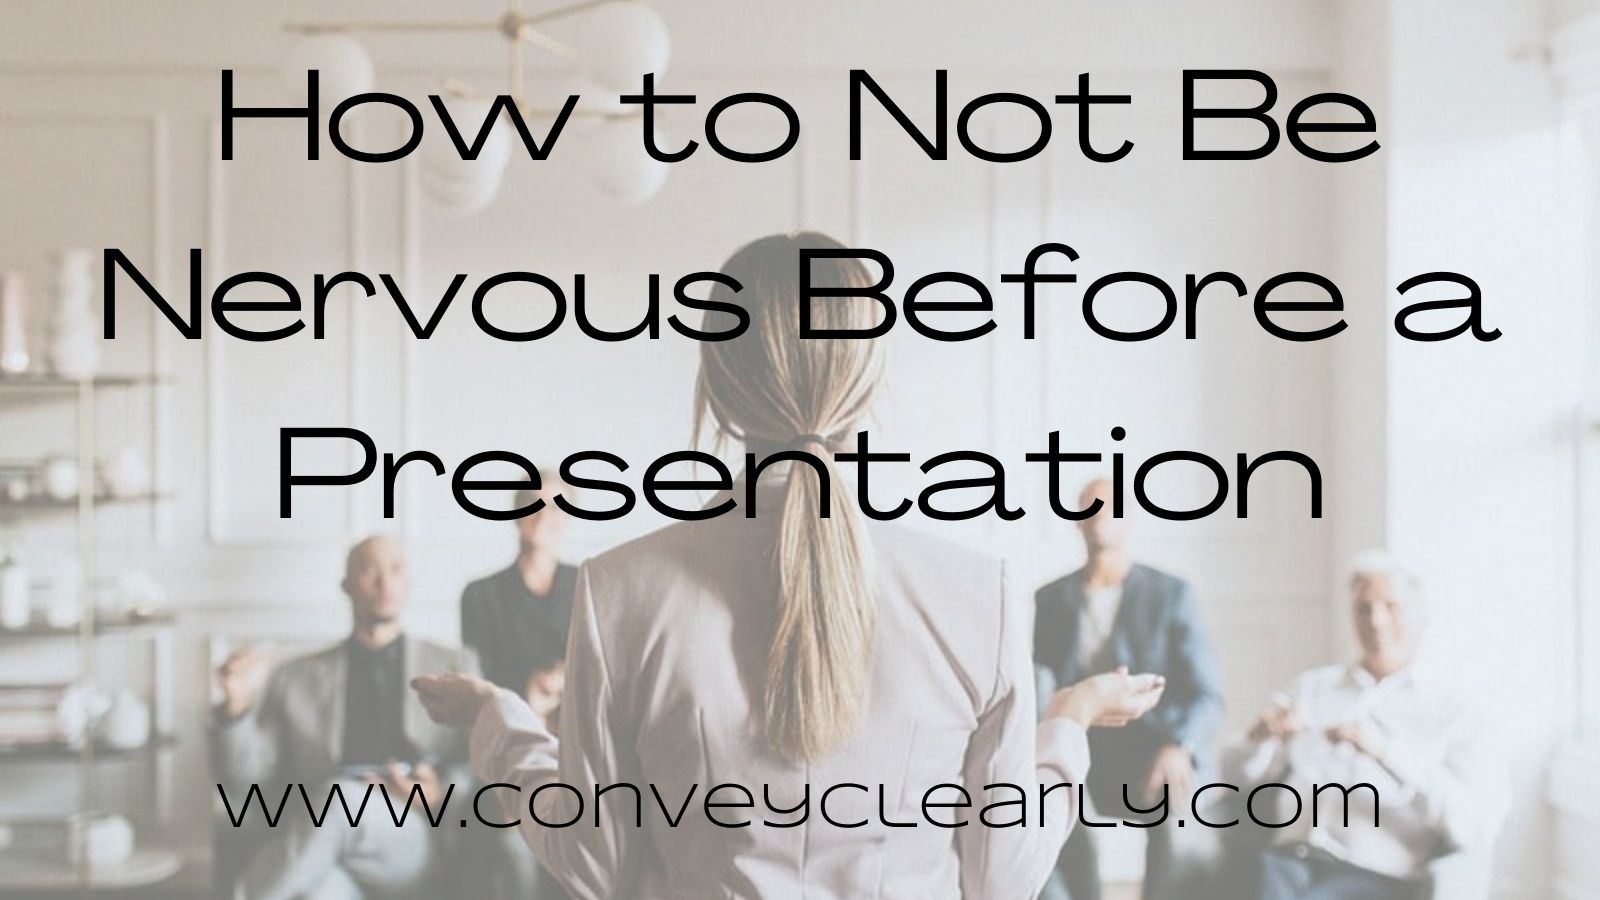 how to do a presentation in class without being nervous